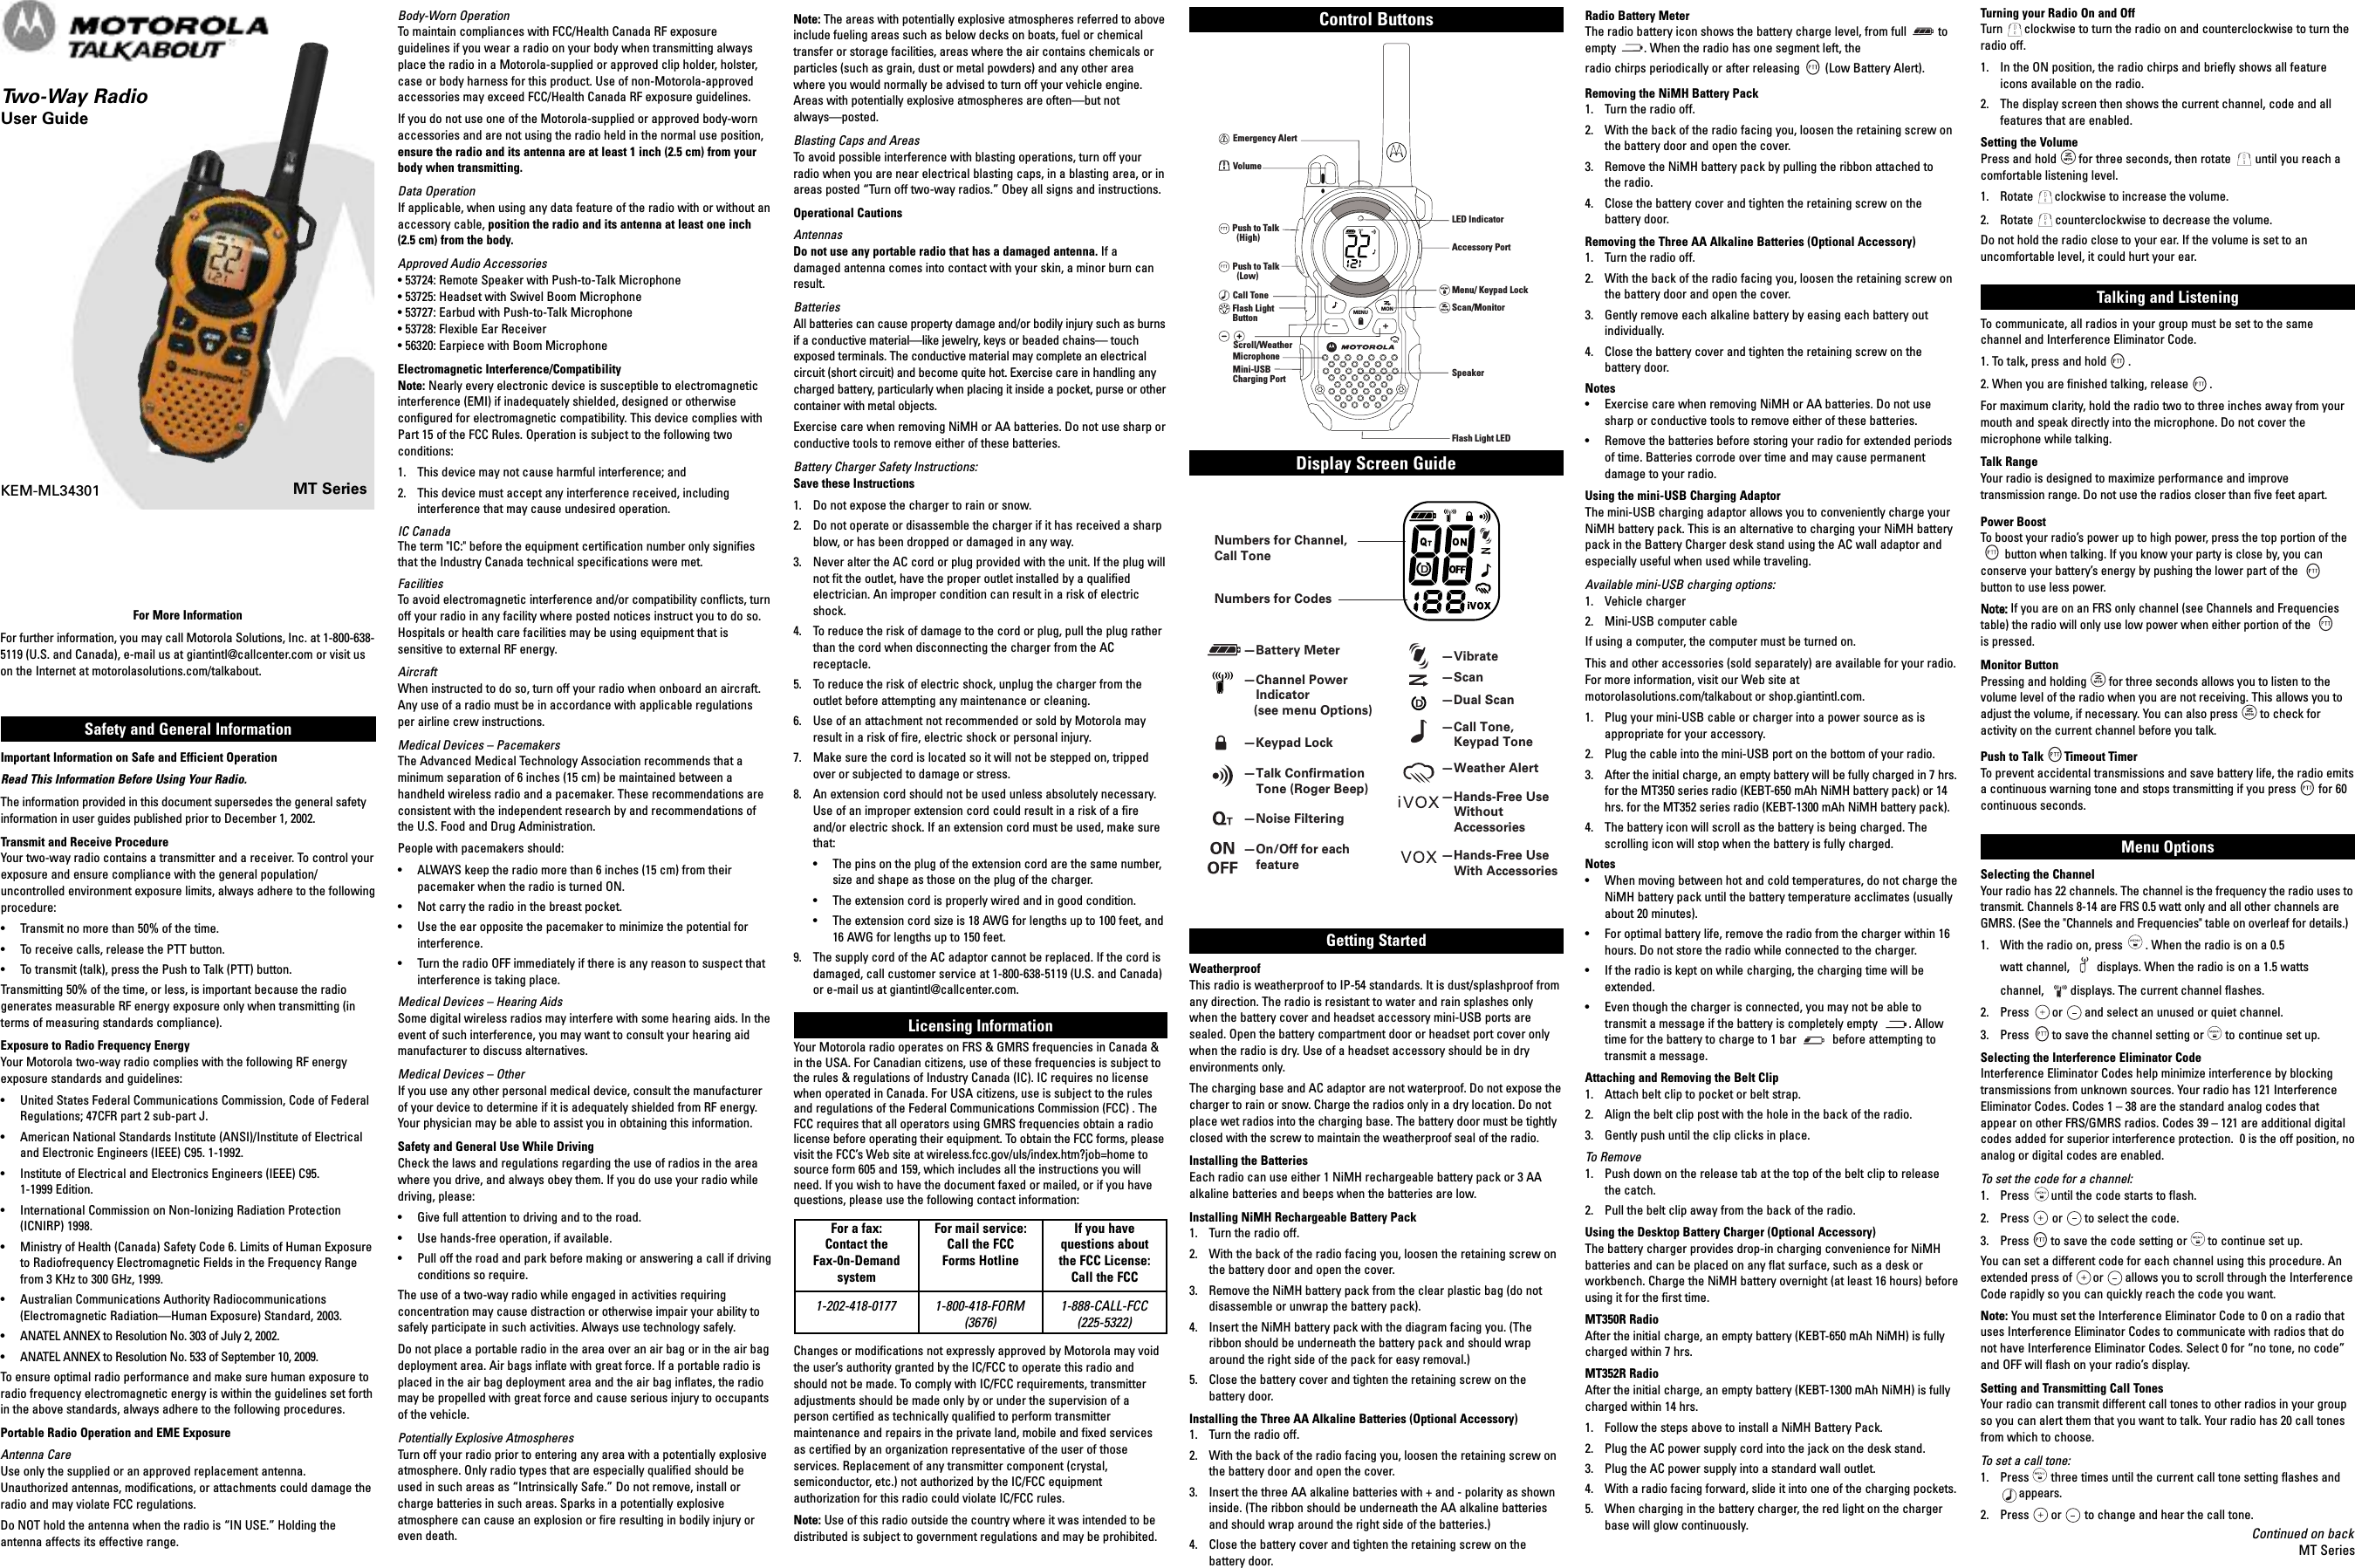 MT SeriesKEM-ML34301Safety and General InformationImportant Information on Safe and Efficient OperationRead This Information Before Using Your Radio.The information provided in this document supersedes the general safetyinformation in user guides published prior to December 1, 2002.Transmit and Receive ProcedureYour two-way radio contains a transmitter and a receiver. To control yourexposure and ensure compliance with the general population/uncontrolled environment exposure limits, always adhere to the followingprocedure:• Transmit no more than 50% of the time.• To receive calls, release the PTT button.• To transmit (talk), press the Push to Talk (PTT) button.Transmitting 50% of the time, or less, is important because the radiogenerates measurable RF energy exposure only when transmitting (interms of measuring standards compliance).Exposure to Radio Frequency EnergyYour Motorola two-way radio complies with the following RF energyexposure standards and guidelines:•  United States Federal Communications Commission, Code of FederalRegulations; 47CFR part 2 sub-part J.•  American National Standards Institute (ANSI)/Institute of Electricaland Electronic Engineers (IEEE) C95. 1-1992.•  Institute of Electrical and Electronics Engineers (IEEE) C95.1-1999 Edition.•  International Commission on Non-Ionizing Radiation Protection(ICNIRP) 1998.•  Ministry of Health (Canada) Safety Code 6. Limits of Human Exposureto Radiofrequency Electromagnetic Fields in the Frequency Rangefrom 3 KHz to 300 GHz, 1999.•  Australian Communications Authority Radiocommunications(Electromagnetic Radiation—Human Exposure) Standard, 2003.•  ANATEL ANNEX to Resolution No. 303 of July 2, 2002. •  ANATEL ANNEX to Resolution No. 533 of September 10, 2009. To ensure optimal radio performance and make sure human exposure toradio frequency electromagnetic energy is within the guidelines set forthin the above standards, always adhere to the following procedures.Portable Radio Operation and EME ExposureAntenna CareUse only the supplied or an approved replacement antenna.Unauthorized antennas, modifications, or attachments could damage theradio and may violate FCC regulations.Do NOT hold the antenna when the radio is “IN USE.” Holding theantenna affects its effective range.Body-Worn OperationTo maintain compliances with FCC/Health Canada RF exposureguidelines if you wear a radio on your body when transmitting alwaysplace the radio in a Motorola-supplied or approved clip holder, holster,case or body harness for this product. Use of non-Motorola-approvedaccessories may exceed FCC/Health Canada RF exposure guidelines.If you do not use one of the Motorola-supplied or approved body-wornaccessories and are not using the radio held in the normal use position,ensure the radio and its antenna are at least 1 inch (2.5 cm) from yourbody when transmitting.Data OperationIf applicable, when using any data feature of the radio with or without anaccessory cable, position the radio and its antenna at least one inch(2.5 cm) from the body.Approved Audio Accessories• 53724: Remote Speaker with Push-to-Talk Microphone• 53725: Headset with Swivel Boom Microphone• 53727: Earbud with Push-to-Talk Microphone• 53728: Flexible Ear Receiver• 56320: Earpiece with Boom MicrophoneElectromagnetic Interference/CompatibilityNote: Nearly every electronic device is susceptible to electromagneticinterference (EMI) if inadequately shielded, designed or otherwiseconfigured for electromagnetic compatibility. This device complies withPart 15 of the FCC Rules. Operation is subject to the following twoconditions:1. This device may not cause harmful interference; and2.  This device must accept any interference received, includinginterference that may cause undesired operation.IC CanadaThe term &quot;IC:&quot; before the equipment certification number only signifiesthat the Industry Canada technical specifications were met.FacilitiesTo avoid electromagnetic interference and/or compatibility conflicts, turnoff your radio in any facility where posted notices instruct you to do so.Hospitals or health care facilities may be using equipment that issensitive to external RF energy.AircraftWhen instructed to do so, turn off your radio when onboard an aircraft.Any use of a radio must be in accordance with applicable regulationsper airline crew instructions.Medical Devices – PacemakersThe Advanced Medical Technology Association recommends that aminimum separation of 6 inches (15 cm) be maintained between ahandheld wireless radio and a pacemaker. These recommendations areconsistent with the independent research by and recommendations ofthe U.S. Food and Drug Administration.People with pacemakers should:•  ALWAYS keep the radio more than 6 inches (15 cm) from theirpacemaker when the radio is turned ON.•  Not carry the radio in the breast pocket.•  Use the ear opposite the pacemaker to minimize the potential forinterference.•  Turn the radio OFF immediately if there is any reason to suspect thatinterference is taking place.Medical Devices – Hearing AidsSome digital wireless radios may interfere with some hearing aids. In theevent of such interference, you may want to consult your hearing aidmanufacturer to discuss alternatives.Medical Devices – OtherIf you use any other personal medical device, consult the manufacturerof your device to determine if it is adequately shielded from RF energy.Your physician may be able to assist you in obtaining this information.Safety and General Use While DrivingCheck the laws and regulations regarding the use of radios in the areawhere you drive, and always obey them. If you do use your radio whiledriving, please:•  Give full attention to driving and to the road.•  Use hands-free operation, if available.•  Pull off the road and park before making or answering a call if drivingconditions so require.The use of a two-way radio while engaged in activities requiringconcentration may cause distraction or otherwise impair your ability tosafely participate in such activities. Always use technology safely.Do not place a portable radio in the area over an air bag or in the air bagdeployment area. Air bags inflate with great force. If a portable radio isplaced in the air bag deployment area and the air bag inflates, the radiomay be propelled with great force and cause serious injury to occupantsof the vehicle.Potentially Explosive AtmospheresTurn off your radio prior to entering any area with a potentially explosiveatmosphere. Only radio types that are especially qualified should beused in such areas as “Intrinsically Safe.” Do not remove, install orcharge batteries in such areas. Sparks in a potentially explosiveatmosphere can cause an explosion or fire resulting in bodily injury oreven death.For More InformationFor further information, you may call Motorola Solutions, Inc. at 1-800-638-5119 (U.S. and Canada), e-mail us at giantintl@callcenter.com or visit uson the Internet at motorolasolutions.com/talkabout.Note: The areas with potentially explosive atmospheres referred to aboveinclude fueling areas such as below decks on boats, fuel or chemicaltransfer or storage facilities, areas where the air contains chemicals orparticles (such as grain, dust or metal powders) and any other areawhere you would normally be advised to turn off your vehicle engine.Areas with potentially explosive atmospheres are often—but notalways—posted.Blasting Caps and AreasTo avoid possible interference with blasting operations, turn off yourradio when you are near electrical blasting caps, in a blasting area, or inareas posted “Turn off two-way radios.” Obey all signs and instructions.Operational CautionsAntennasDo not use any portable radio that has a damaged antenna. If adamaged antenna comes into contact with your skin, a minor burn canresult.BatteriesAll batteries can cause property damage and/or bodily injury such as burnsif a conductive material—like jewelry, keys or beaded chains— touchexposed terminals. The conductive material may complete an electricalcircuit (short circuit) and become quite hot. Exercise care in handling anycharged battery, particularly when placing it inside a pocket, purse or othercontainer with metal objects.Exercise care when removing NiMH or AA batteries. Do not use sharp orconductive tools to remove either of these batteries.Battery Charger Safety Instructions:Save these Instructions1.  Do not expose the charger to rain or snow.2.  Do not operate or disassemble the charger if it has received a sharpblow, or has been dropped or damaged in any way.3.  Never alter the AC cord or plug provided with the unit. If the plug willnot fit the outlet, have the proper outlet installed by a qualifiedelectrician. An improper condition can result in a risk of electricshock.4.  To reduce the risk of damage to the cord or plug, pull the plug ratherthan the cord when disconnecting the charger from the ACreceptacle.5.  To reduce the risk of electric shock, unplug the charger from theoutlet before attempting any maintenance or cleaning.6.  Use of an attachment not recommended or sold by Motorola mayresult in a risk of fire, electric shock or personal injury.7.  Make sure the cord is located so it will not be stepped on, trippedover or subjected to damage or stress.8.  An extension cord should not be used unless absolutely necessary.Use of an improper extension cord could result in a risk of a fireand/or electric shock. If an extension cord must be used, make surethat:•  The pins   on the plug of the extension cord are the same number,size and shape as those on the plug of the charger.•  The extension cord is properly wired and in good condition.•  The extension cord size is 18 AWG for lengths up to 100 feet, and16 AWG for lengths up to 150 feet.9.  The supply cord of the AC adaptor cannot be replaced. If the cord isdamaged, call customer service at 1-800-638-5119 (U.S. and Canada)or e-mail us at giantintl@callcenter.com.Licensing InformationYour Motorola radio operates on FRS &amp; GMRS frequencies in Canada &amp;in the USA. For Canadian citizens, use of these frequencies is subject tothe rules &amp; regulations of Industry Canada (IC). IC requires no licensewhen operated in Canada. For USA citizens, use is subject to the rulesand regulations of the Federal Communications Commission (FCC) . TheFCC requires that all operators using GMRS frequencies obtain a radiolicense before operating their equipment. To obtain the FCC forms, pleasevisit the FCC’s Web site at wireless.fcc.gov/uls/index.htm?job=home tosource form 605 and 159, which includes all the instructions you willneed. If you wish to have the document faxed or mailed, or if you havequestions, please use the following contact information:Changes or modifications not expressly approved by Motorola may voidthe user’s authority granted by the IC/FCC to operate this radio andshould not be made. To comply with IC/FCC requirements, transmitteradjustments should be made only by or under the supervision of aperson certified as technically qualified to perform transmittermaintenance and repairs in the private land, mobile and fixed servicesas certified by an organization representative of the user of thoseservices. Replacement of any transmitter component (crystal,semiconductor, etc.) not authorized by the IC/FCC equipmentauthorization for this radio could violate IC/FCC rules.Note: Use of this radio outside the country where it was intended to bedistributed is subject to government regulations and may be prohibited.®Radio Battery MeterThe radio battery icon shows the battery charge level, from full  toempty . When the radio has one segment left, the radio chirps periodically or after releasing (Low Battery Alert).Removing the NiMH Battery Pack1. Turn the radio off.2. With the back of the radio facing you, loosen the retaining screw onthe battery door and open the cover.3. Remove the NiMH battery pack by pulling the ribbon attached to the radio.4. Close the battery cover and tighten the retaining screw on thebattery door.Removing the Three AA Alkaline Batteries (Optional Accessory)1.  Turn the radio off.2.  With the back of the radio facing you, loosen the retaining screw onthe battery door and open the cover.3.  Gently remove each alkaline battery by easing each battery outindividually.4.  Close the battery cover and tighten the retaining screw on thebattery door.Notes• Exercise care when removing NiMH or AA batteries. Do not usesharp or conductive tools to remove either of these batteries.•  Remove the batteries before storing your radio for extended periodsof time. Batteries corrode over time and may cause permanentdamage to your radio.Using the mini-USB Charging Adaptor The mini-USB charging adaptor allows you to conveniently charge yourNiMH battery pack. This is an alternative to charging your NiMH batterypack in the Battery Charger desk stand using the AC wall adaptor andespecially useful when used while traveling. Available mini-USB charging options:1. Vehicle charger2. Mini-USB computer cableIf using a computer, the computer must be turned on.This and other accessories (sold separately) are available for your radio.For more information, visit our Web site atmotorolasolutions.com/talkabout or shop.giantintl.com.1. Plug your mini-USB cable or charger into a power source as isappropriate for your accessory. 2. Plug the cable into the mini-USB port on the bottom of your radio.3. After the initial charge, an empty battery will be fully charged in 7 hrs.for the MT350 series radio (KEBT-650 mAh NiMH battery pack) or 14hrs. for the MT352 series radio (KEBT-1300 mAh NiMH battery pack).4. The battery icon will scroll as the battery is being charged. Thescrolling icon will stop when the battery is fully charged.Notes• When moving between hot and cold temperatures, do not charge theNiMH battery pack until the battery temperature acclimates (usuallyabout 20 minutes).• For optimal battery life, remove the radio from the charger within 16hours. Do not store the radio while connected to the charger.• If the radio is kept on while charging, the charging time will beextended. • Even though the charger is connected, you may not be able totransmit a message if the battery is completely empty          . Allowtime for the battery to charge to 1 bar  before attempting totransmit a message. Attaching and Removing the Belt Clip1.  Attach belt clip to pocket or belt strap.2.  Align the belt clip post with the hole in the back of the radio.3.  Gently push until the clip clicks in place.To Remove1.  Push down on the release tab at the top of the belt clip to release the catch.2.  Pull the belt clip away from the back of the radio.Using the Desktop Battery Charger (Optional Accessory)The battery charger provides drop-in charging convenience for NiMHbatteries and can be placed on any flat surface, such as a desk orworkbench. Charge the NiMH battery overnight (at least 16 hours) beforeusing it for the first time. MT350R RadioAfter the initial charge, an empty battery (KEBT-650 mAh NiMH) is fullycharged within 7 hrs.MT352R RadioAfter the initial charge, an empty battery (KEBT-1300 mAh NiMH) is fullycharged within 14 hrs.1.  Follow the steps above to install a NiMH Battery Pack.2.  Plug the AC power supply cord into the jack on the desk stand.3.  Plug the AC power supply into a standard wall outlet.4.  With a radio facing forward, slide it into one of the charging pockets.5.  When charging in the battery charger, the red light on the chargerbase will glow continuously.Turning your Radio On and OffTurn clockwise to turn the radio on and counterclockwise to turn theradio off.1.  In the ON position, the radio chirps and briefly shows all featureicons available on the radio.2.  The display screen then shows the current channel, code and allfeatures that are enabled.Setting the VolumePress and hold for three seconds, then rotate  until you reach acomfortable listening level.1.  Rotate clockwise to increase the volume.2.  Rotate counterclockwise to decrease the volume.Do not hold the radio close to your ear. If the volume is set to anuncomfortable level, it could hurt your ear.Talking and ListeningTo communicate, all radios in your group must be set to the samechannel and Interference Eliminator Code.1. To talk, press and hold .2. When you are finished talking, release .For maximum clarity, hold the radio two to three inches away from yourmouth and speak directly into the microphone. Do not cover themicrophone while talking.Talk RangeYour radio is designed to maximize performance and improvetransmission range. Do not use the radios closer than five feet apart.Power BoostTo boost your radio’s power up to high power, press the top portion of thebutton when talking. If you know your party is close by, you canconserve your battery’s energy by pushing the lower part of thebutton to use less power.Note: If you are on an FRS only channel (see Channels and Frequenciestable) the radio will only use low power when either portion of theis pressed.Monitor ButtonPressing and holding for three seconds allows you to listen to thevolume level of the radio when you are not receiving. This allows you toadjust the volume, if necessary. You can also press to check foractivity on the current channel before you talk.Push to Talk Timeout TimerTo prevent accidental transmissions and save battery life, the radio emitsa continuous warning tone and stops transmitting if you press for 60continuous seconds.Menu OptionsSelecting the ChannelYour radio has 22 channels. The channel is the frequency the radio uses totransmit. Channels 8-14 are FRS 0.5 watt only and all other channels areGMRS. (See the &quot;Channels and Frequencies&quot; table on overleaf for details.)1.  With the radio on, press . When the radio is on a 0.5 watt channel,  displays. When the radio is on a 1.5 watts channel,  displays. The current channel flashes.2.  Press or and select an unused or quiet channel.3.  Press to save the channel setting or to continue set up.Selecting the Interference Eliminator CodeInterference Eliminator Codes help minimize interference by blockingtransmissions from unknown sources. Your radio has 121 InterferenceEliminator Codes. Codes 1 – 38 are the standard analog codes thatappear on other FRS/GMRS radios. Codes 39 – 121 are additional digitalcodes added for superior interference protection.  0 is the off position, noanalog or digital codes are enabled.To set the code for a channel:1.  Press until the code starts to flash.2.  Press or to select the code.3. Press to save the code setting or to continue set up.You can set a different code for each channel using this procedure. Anextended press of or allows you to scroll through the InterferenceCode rapidly so you can quickly reach the code you want.Note: You must set the Interference Eliminator Code to 0 on a radio thatuses Interference Eliminator Codes to communicate with radios that donot have Interference Eliminator Codes. Select 0 for “no tone, no code”and OFF will flash on your radio’s display.Setting and Transmitting Call TonesYour radio can transmit different call tones to other radios in your groupso you can alert them that you want to talk. Your radio has 20 call tonesfrom which to choose. To set a call tone:1.  Press three times until the current call tone setting flashes and        appears. 2.  Press or to change and hear the call tone.Display Screen GuideContinued on backMT SeriesControl ButtonsMONMENUEmergency AlertFlash Light LEDMenu/ Keypad LockScan/MonitorSpeakerAccessory PortLED IndicatorCall ToneMicrophoneFlash LightButtonVolumePush to Talk  (High)Push to Talk  (Low)Scroll/WeatherMini-USBCharging PortNumbers for CodesNumbers for Channel,Call Tone—Battery Meter—Channel Power Indicator   (see menu Options)—Keypad Lock—Talk Conﬁrmation   Tone (Roger Beep)—Noise Filtering—On/Off for each  feature—Scan—Call Tone,  Keypad Tone—Weather Alert—Hands-Free Use  Without Accessories—Hands-Free Use  With Accessories—Dual Scan—VibrateNumbers for CodesNumbers for Channel,Call Tone—Battery Meter—Channel Power Indicator   (see menu Options)—Keypad Lock—Talk Conﬁrmation   Tone (Roger Beep)—Noise Filtering—On/Off for each  feature—Scan—Call Tone,  Keypad Tone—Weather Alert—Hands-Free Use Without Accessories—Hands-Free Use  With Accessories—Dual Scan—VibrateEmergency AlertFlash Light LEDMenu/ Keypad LockScan/MonitorSpeakerAccessory PortLED IndicatorCall ToneMicrophoneFlash LightButtonVolumePush to Talk  (High)Push to Talk  (Low)Scroll/WeatherMini-USBCharging PortMONMENUMT350Line Drawing best fitting for UGGetting StartedWeatherproofThis radio is weatherproof to IP-54 standards. It is dust/splashproof fromany direction. The radio is resistant to water and rain splashes onlywhen the battery cover and headset accessory mini-USB ports aresealed. Open the battery compartment door or headset port cover onlywhen the radio is dry. Use of a headset accessory should be in dryenvironments only. The charging base and AC adaptor are not waterproof. Do not expose thecharger to rain or snow. Charge the radios only in a dry location. Do notplace wet radios into the charging base. The battery door must be tightlyclosed with the screw to maintain the weatherproof seal of the radio.Installing the BatteriesEach radio can use either 1 NiMH rechargeable battery pack or 3 AAalkaline batteries and beeps when the batteries are low.Installing NiMH Rechargeable Battery Pack1.  Turn the radio off.2.  With the back of the radio facing you, loosen the retaining screw onthe battery door and open the cover.3.  Remove the NiMH battery pack from the clear plastic bag (do notdisassemble or unwrap the battery pack).4.  Insert the NiMH battery pack with the diagram facing you. (Theribbon should be underneath the battery pack and should wraparound the right side of the pack for easy removal.)5.  Close the battery cover and tighten the retaining screw on thebattery door.Installing the Three AA Alkaline Batteries (Optional Accessory)1. Turn the radio off.2.  With the back of the radio facing you, loosen the retaining screw onthe battery door and open the cover.3.  Insert the three AA alkaline batteries with + and - polarity as showninside. (The ribbon should be underneath the AA alkaline batteriesand should wrap around the right side of the batteries.)4.  Close the battery cover and tighten the retaining screw on thebattery door.For a fax: Contact the Fax-0n-DemandsystemFor mail service: Call the FCC Forms HotlineIf you have questions about the FCC License: Call the FCC1-202-418-0177 1-800-418-FORM(3676) 1-888-CALL-FCC(225-5322)Two-Way RadioUser Guide MONMENUEmergency AlertFlash Light LEDMenu/ Keypad LockScan/MonitorSpeakerAccessory PortLED IndicatorCall ToneMicrophoneFlash LightButtonVolumePush to Talk  (High)Push to Talk  (Low)Scroll/WeatherMini-USBCharging PortNumbers for CodesNumbers for Channel,Call Tone—Battery Meter—Channel Power  Indicator   (see menu Options)—Keypad Lock—Talk Conﬁrmation   Tone (Roger Beep)—Noise Filtering—On/Off for each  feature—Scan—Call Tone,  Keypad Tone—Weather Alert—Hands-Free Use  Without  Accessories—Hands-Free Use  With Accessories—Dual Scan—VibrateNumbers for CodesNumbers for Channel,Call Tone—Battery Meter—Channel Power Indicator   (see menu Options)—Keypad Lock—Talk Conﬁrmation  Tone (Roger Beep)—Noise Filtering—On/Off for each  feature—Scan—Call Tone, Keypad Tone—Weather Alert—Hands-Free Use  Without  Accessories—Hands-Free Use  With Accessories—Dual Scan—VibrateEmergency AlertFlash Light LEDMenu/ Keypad LockScan/MonitorSpeakerAccessory PortLED IndicatorCall ToneMicrophoneFlash LightButtonVolumePush to Talk  (High)Push to Talk  (Low)Scroll/WeatherMini-USBCharging PortMONMENUMT350Line Drawing best fitting for UG